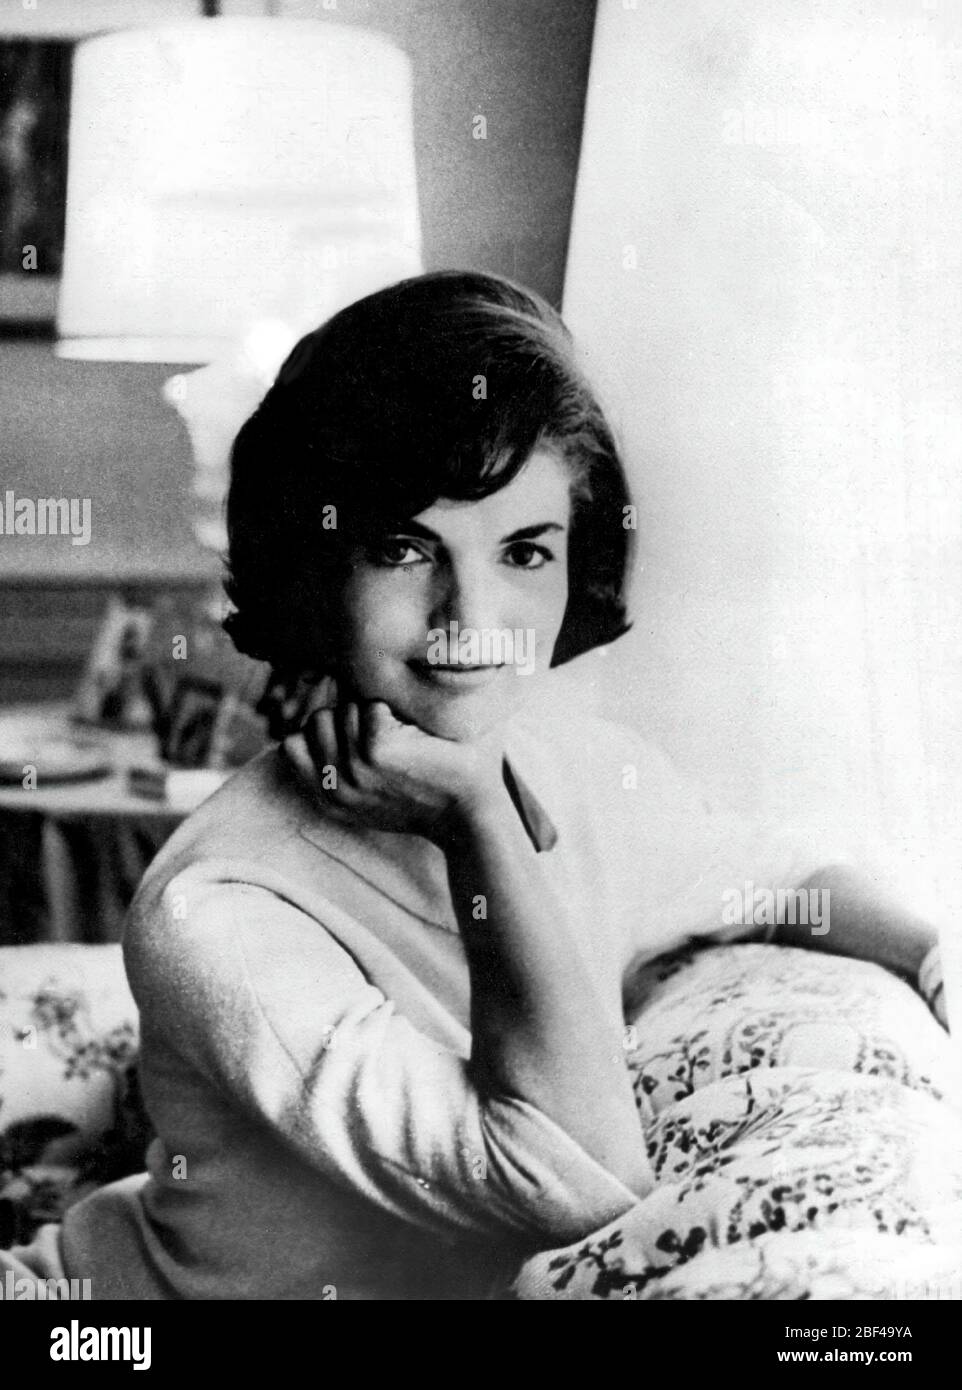 First Lady of the United States JACQUELINE KENNEDY. Stock Photo